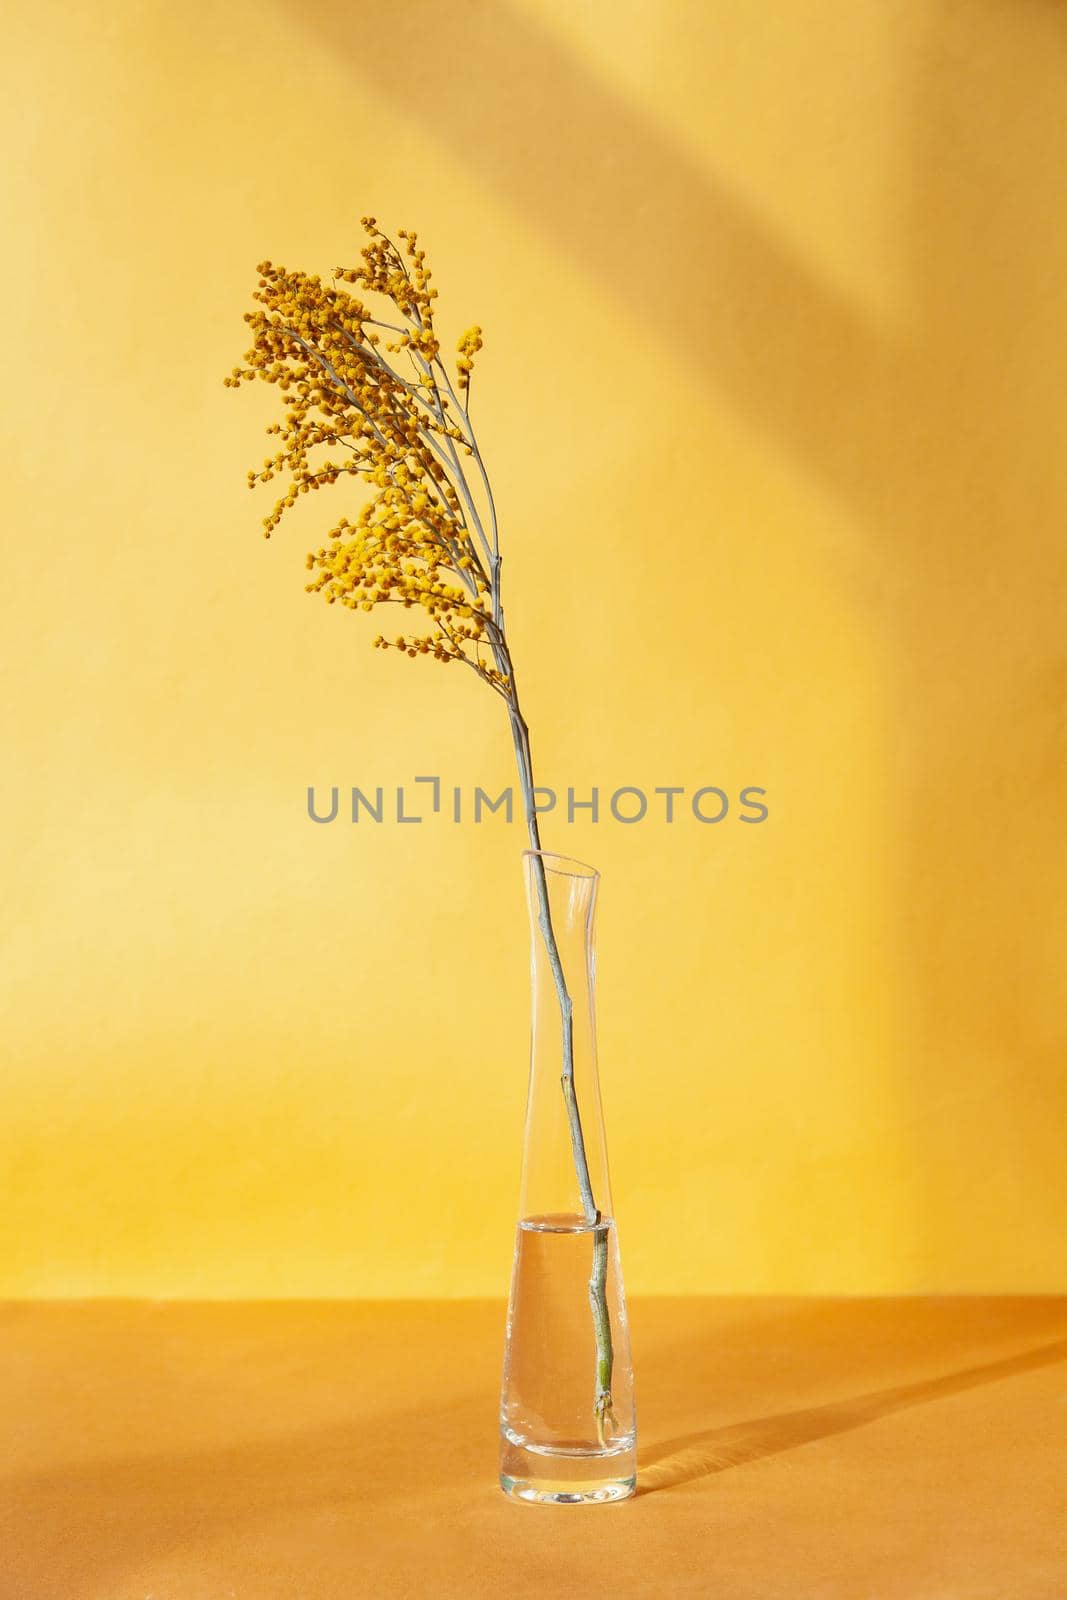 Blooming twig in glass vase against yellow background by Julenochek